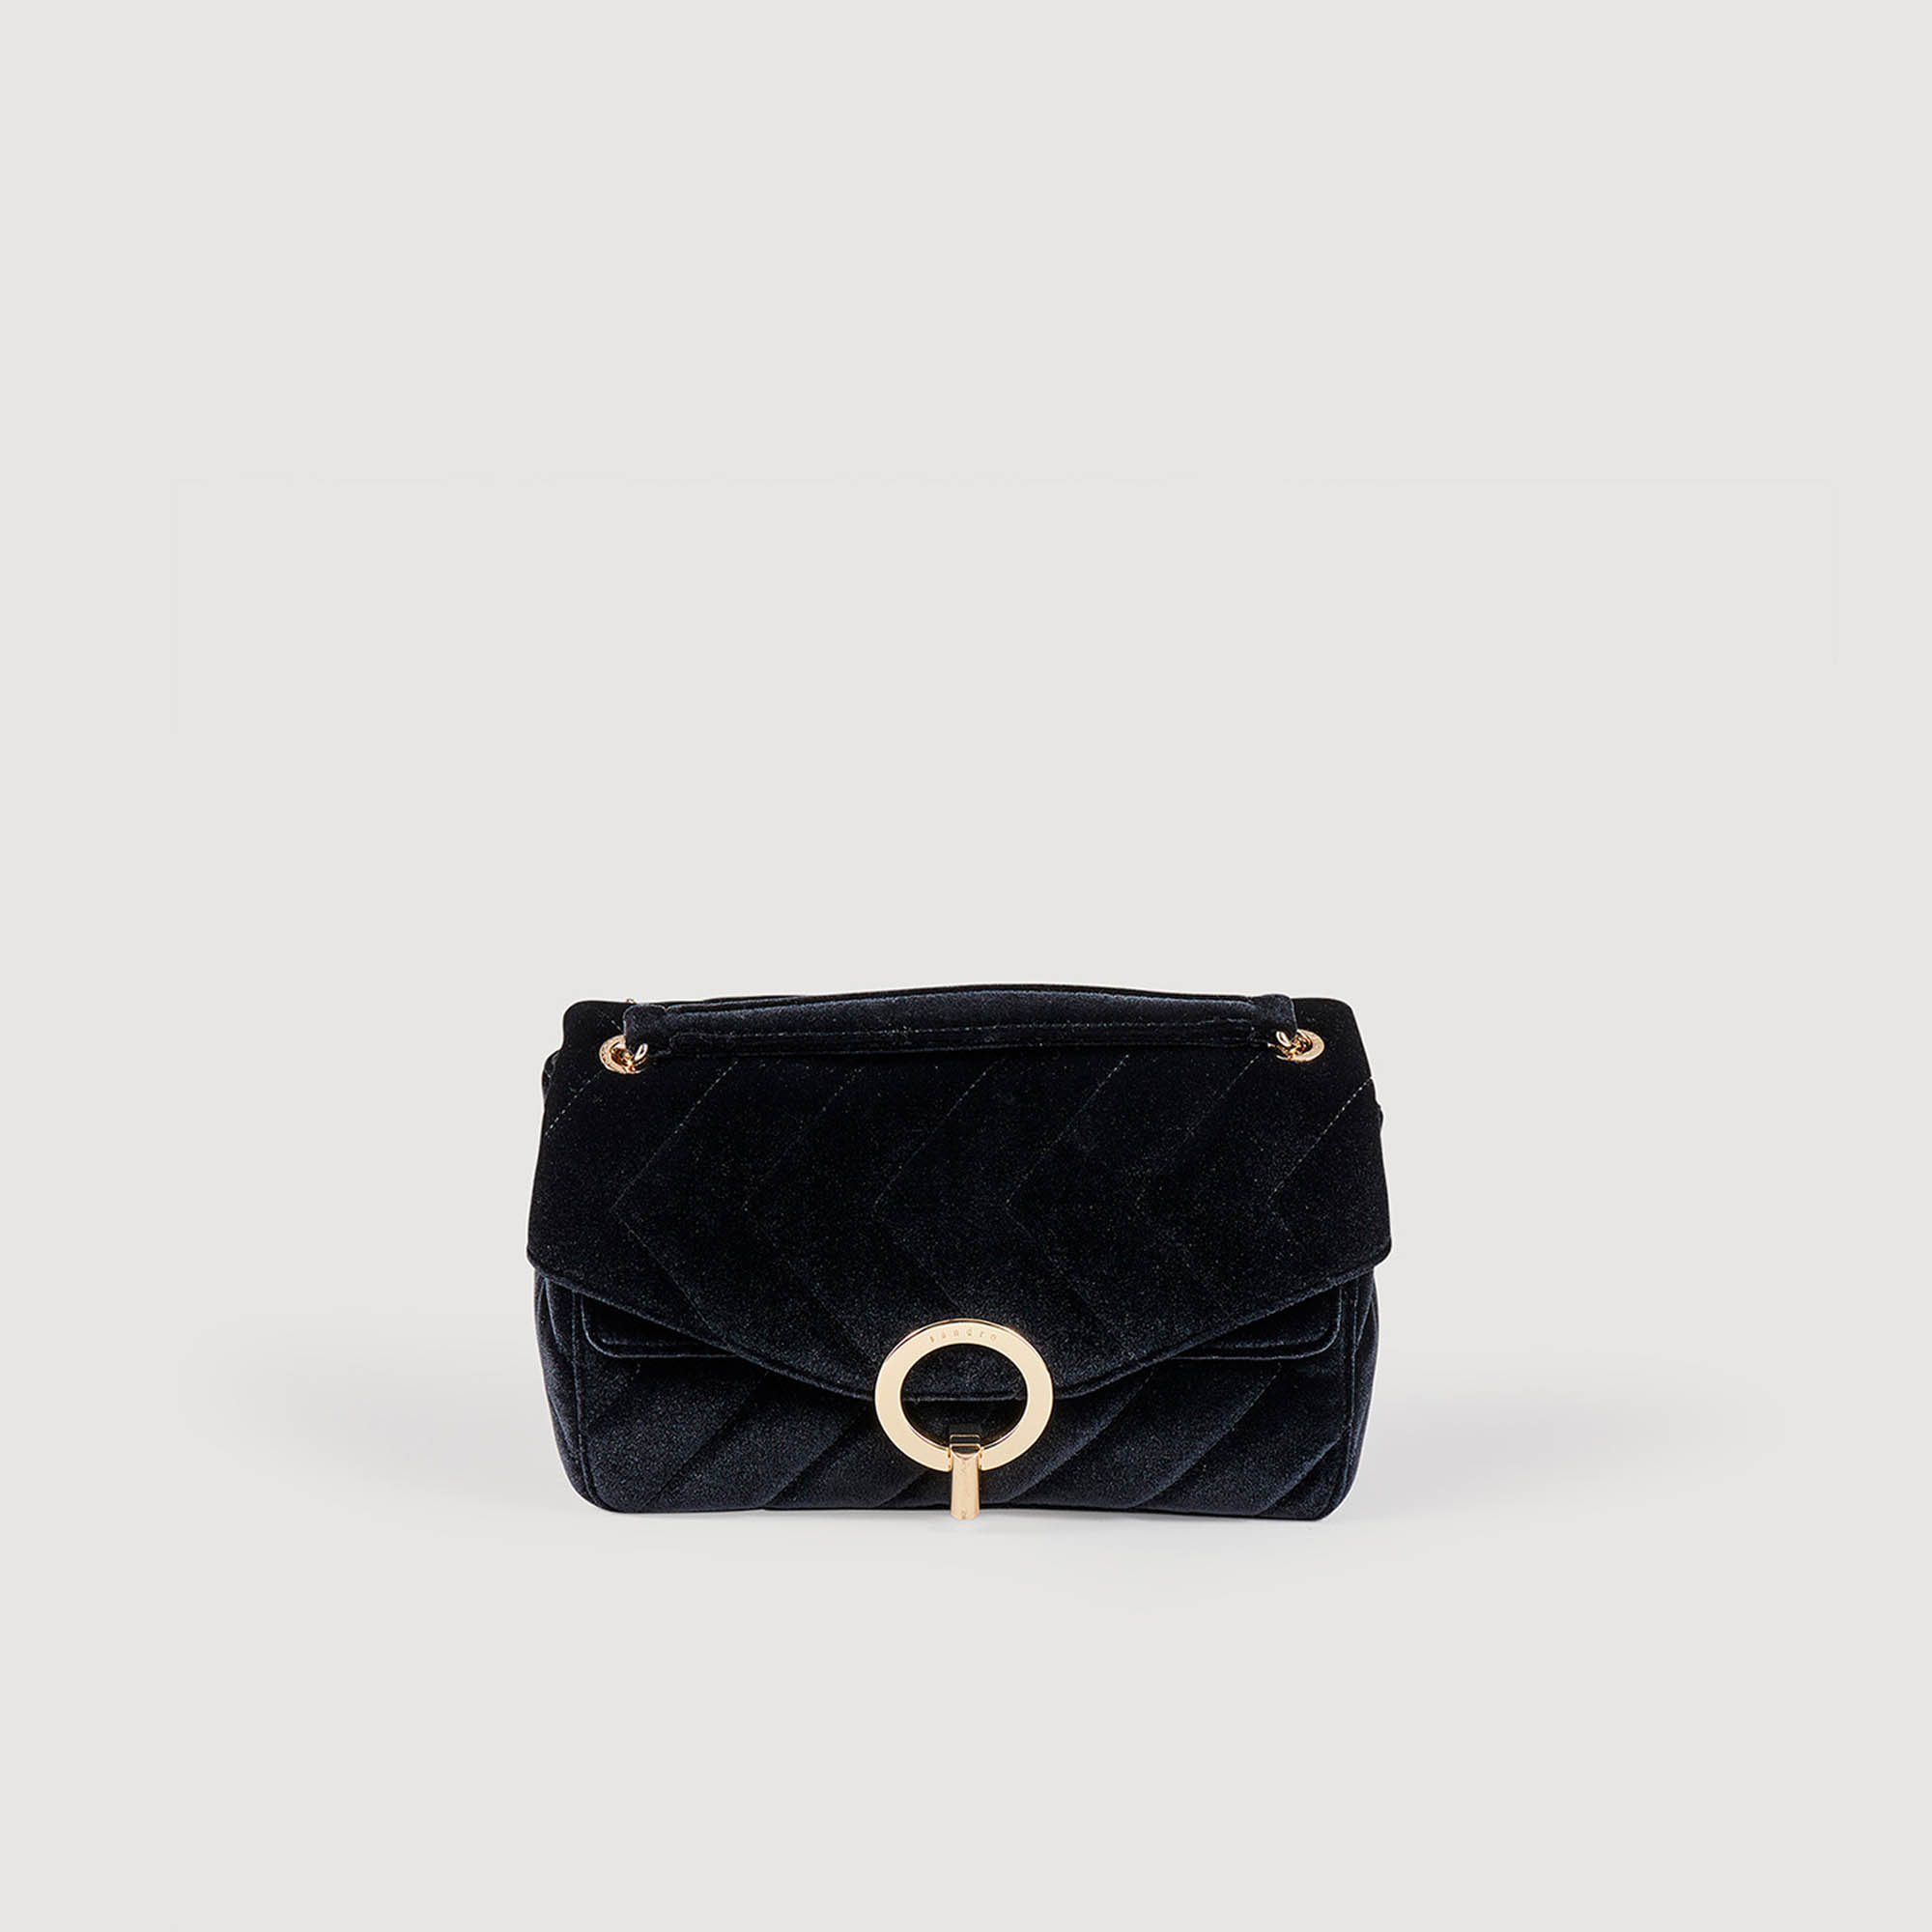 Sandro polyester Lining: Sandro women's bag â€¢ Quilted velvet bag to carry in two ways â€¢ Signature graphic fastening â€¢ Split leather lining â€¢ Inside patch pocket â€¢ Double compartment â€¢ Patch pocket on the back â€¢ Chain strap with leather shoulder tab â€¢ L 23 cm x H 18 cm x D 7 cm